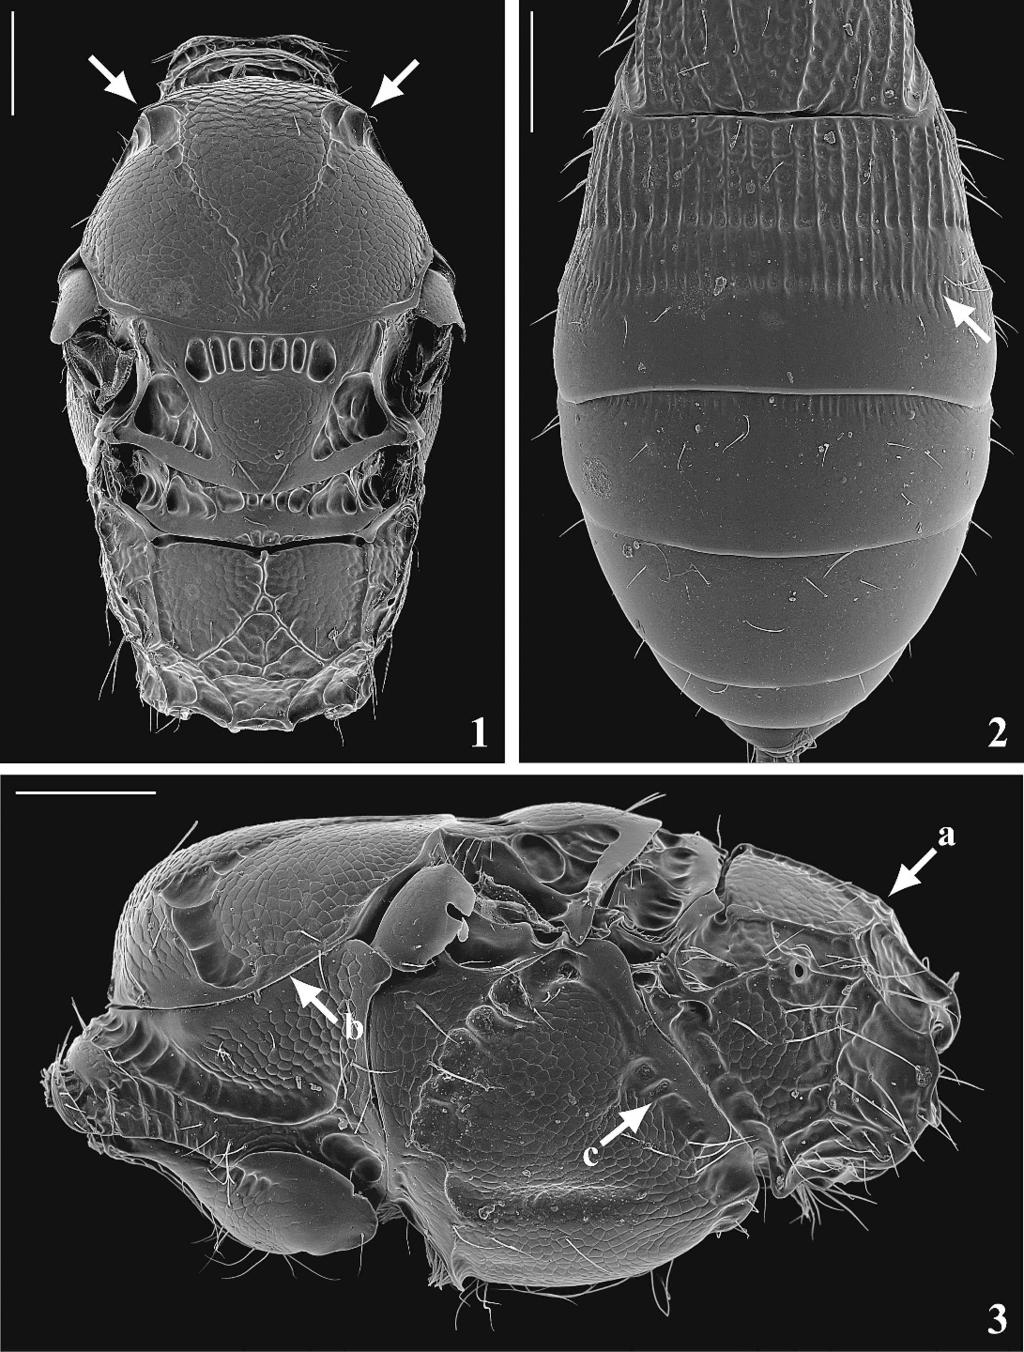 VOLUME 111, NUMBER 1 185 Figs. 1 3. Coiba jeffersoni. 1, Dorsal view of mesosoma. Arrows 5 mesoscutum without sharp protrusions anterolaterally. 2, Dorsal view of gaster.